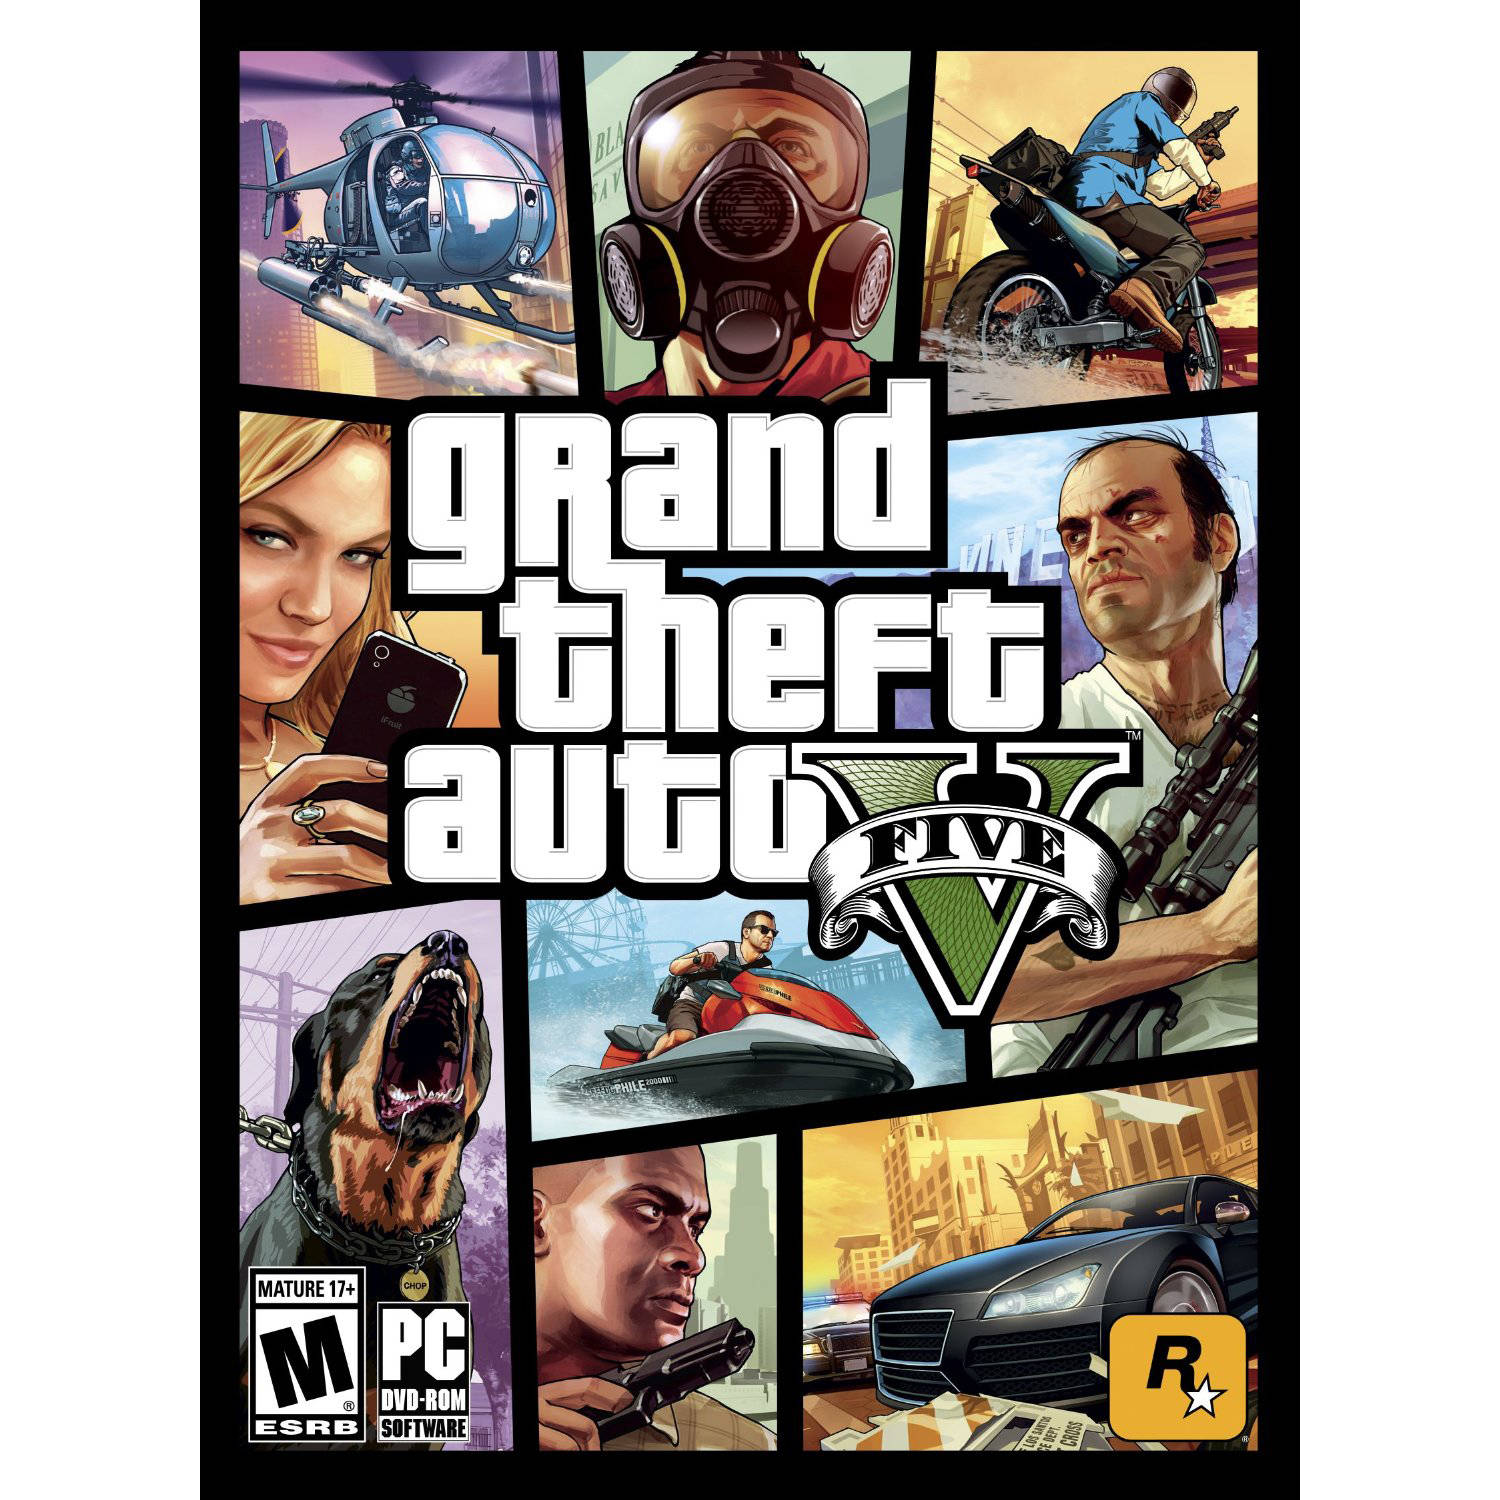 Grand Theft Auto V Standard Edition PlayStation 5 57864 - Best Buy